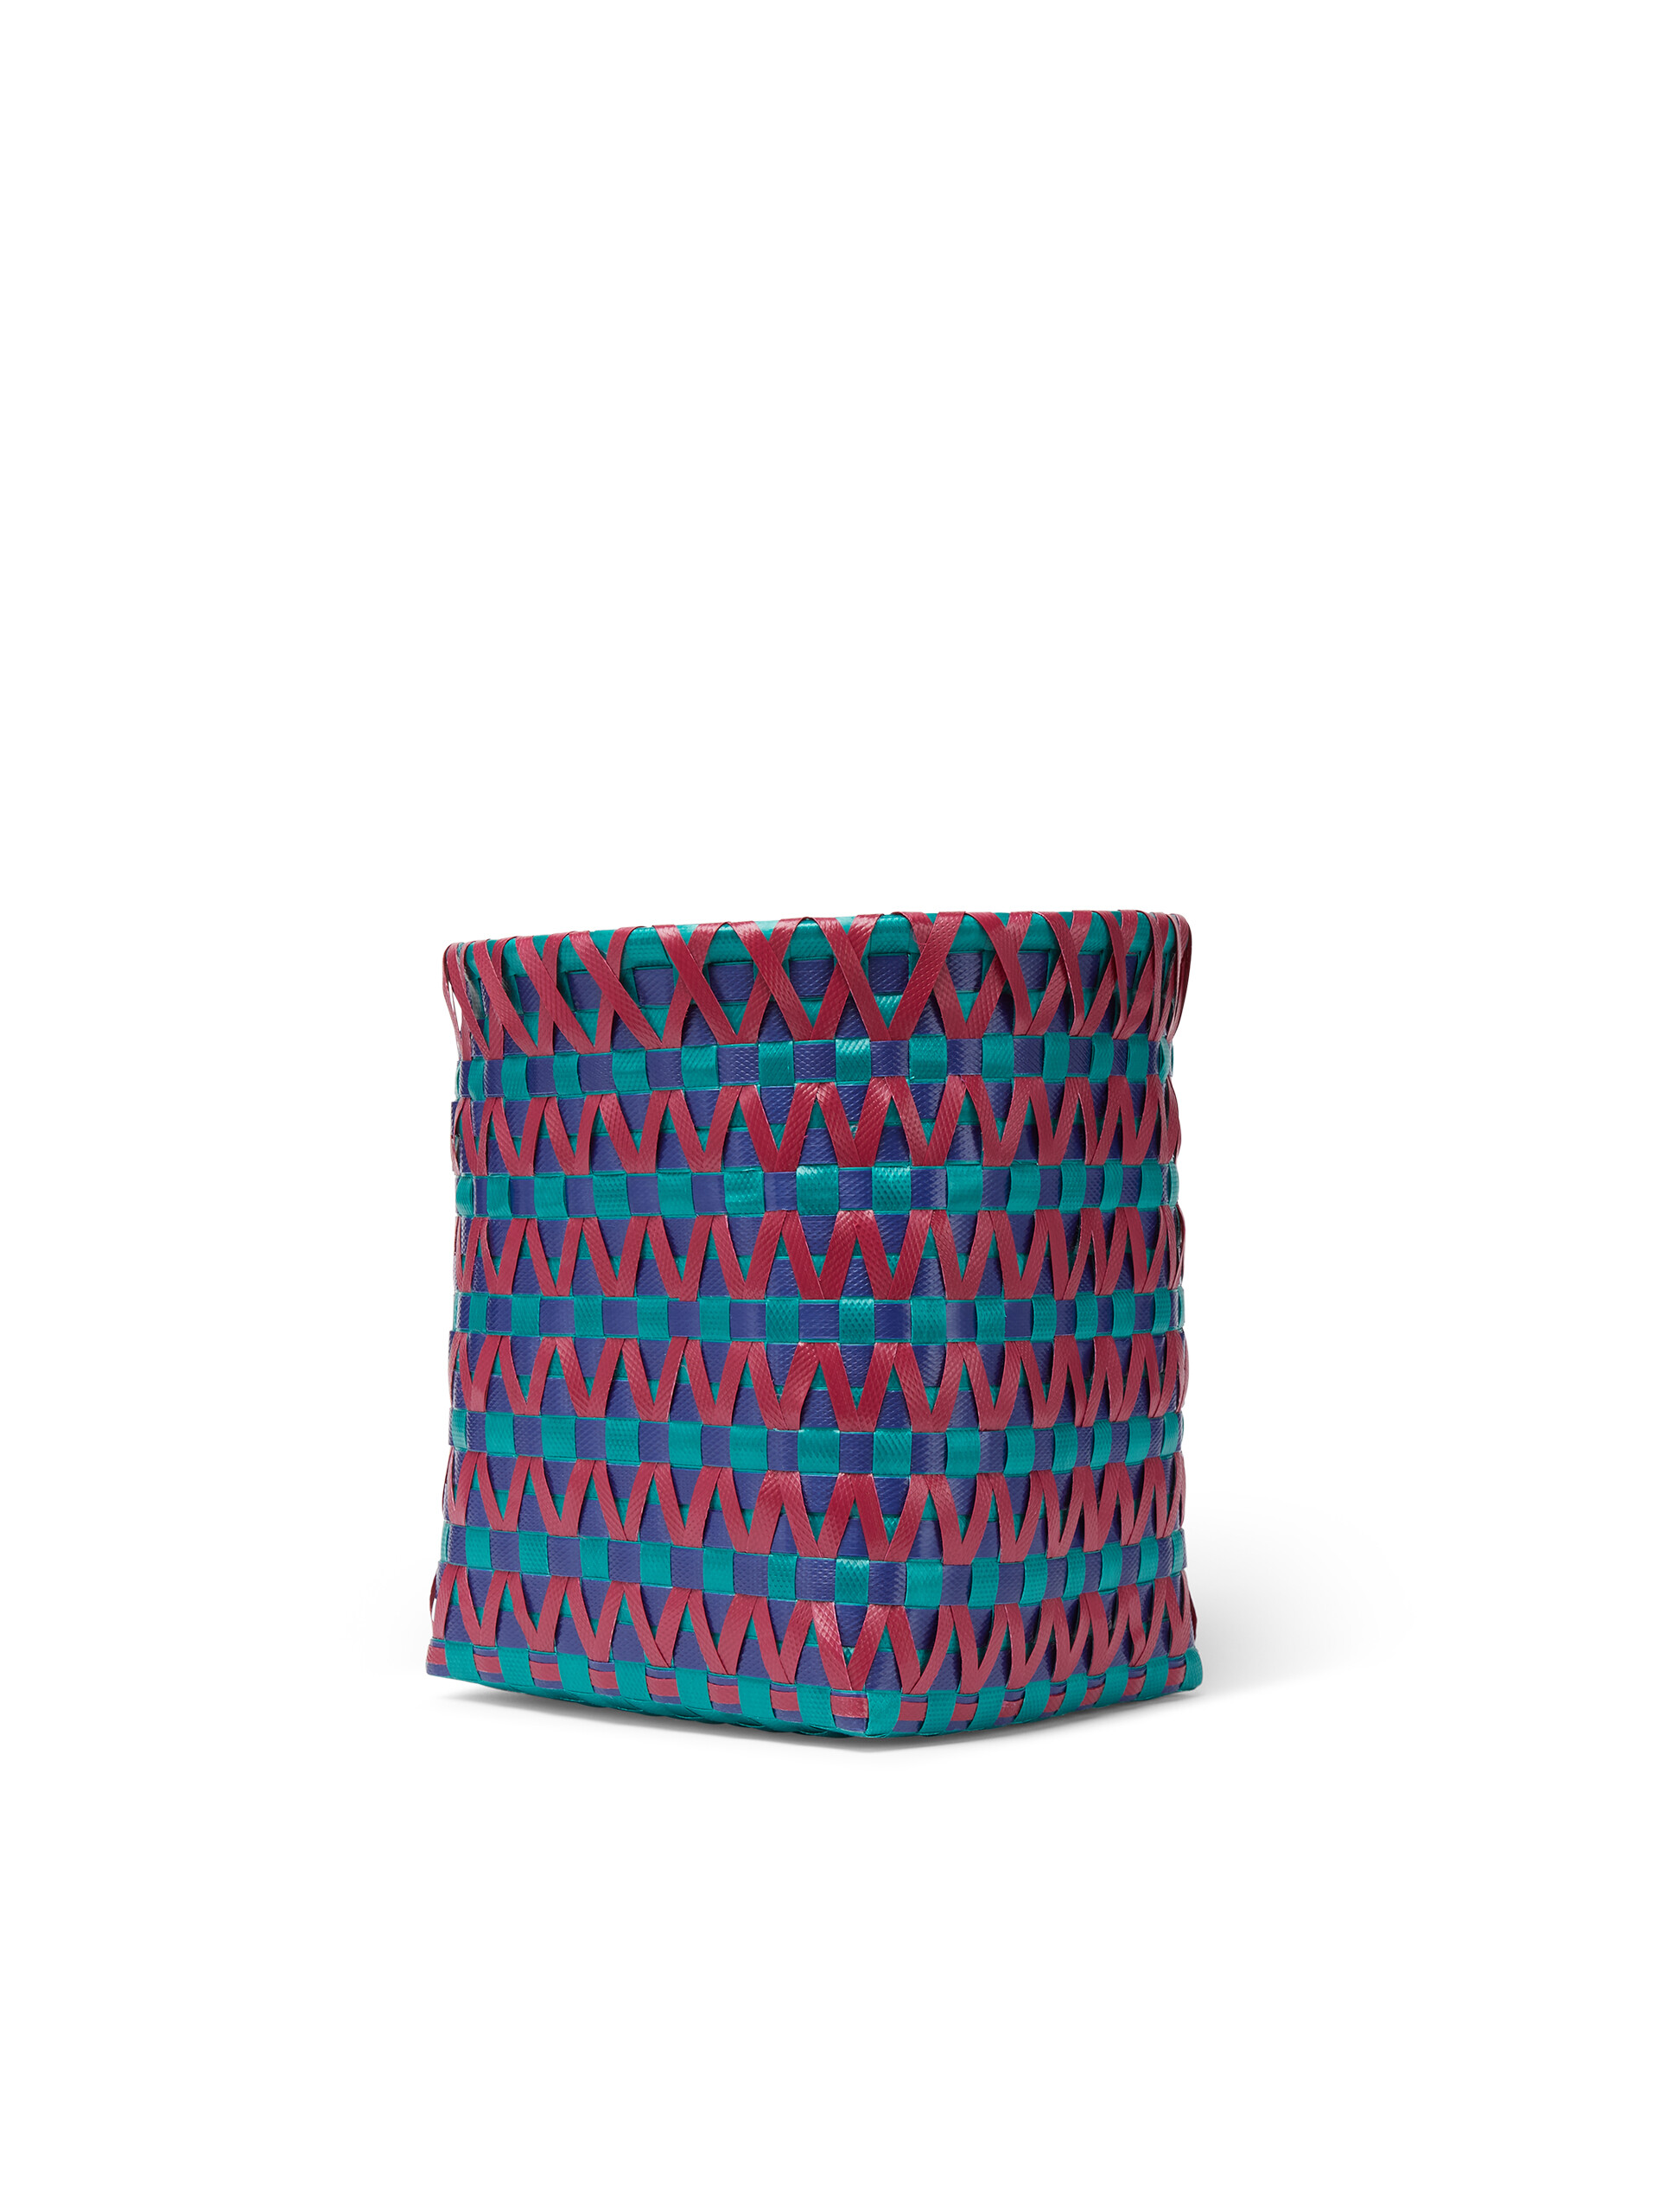 MARNI MARKET basket in pale blue blue and burgundy woven PVC - Home Accessories - Image 2